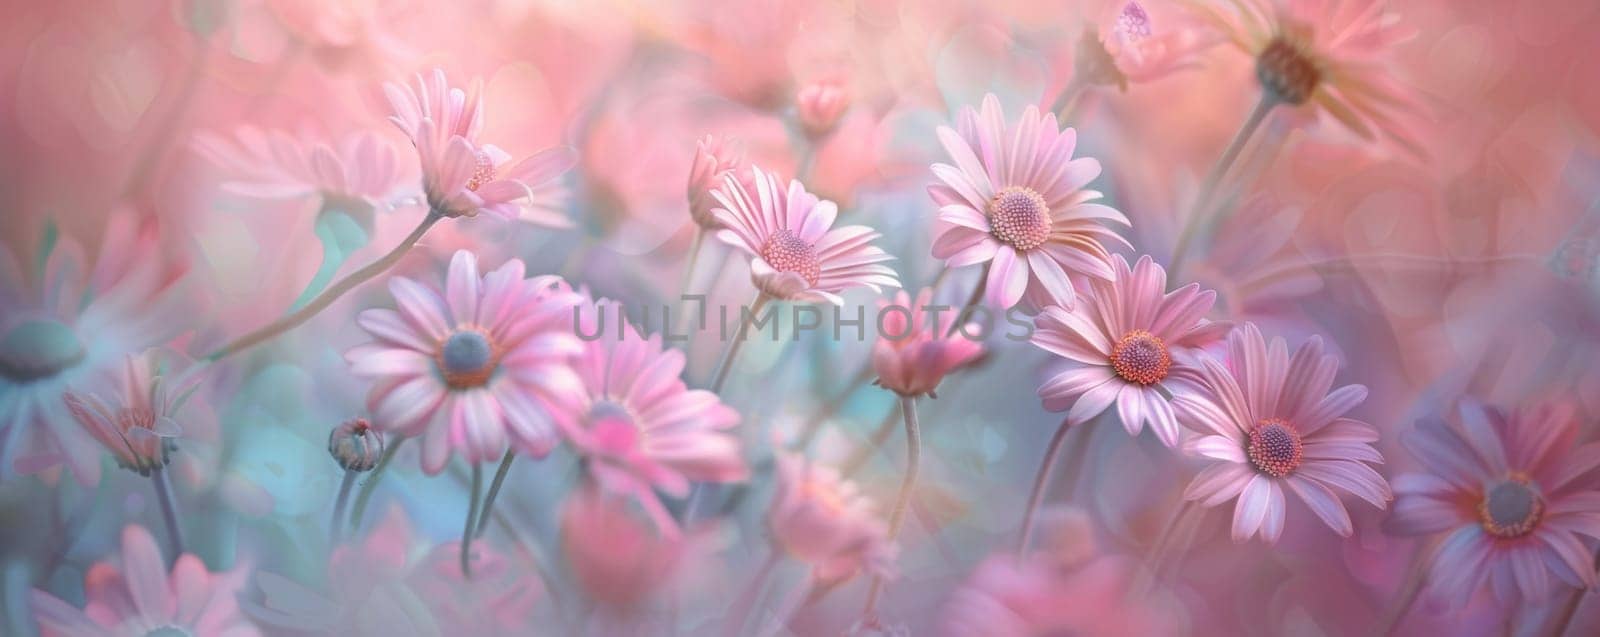 Pastel-colored daisies in a dreamy field